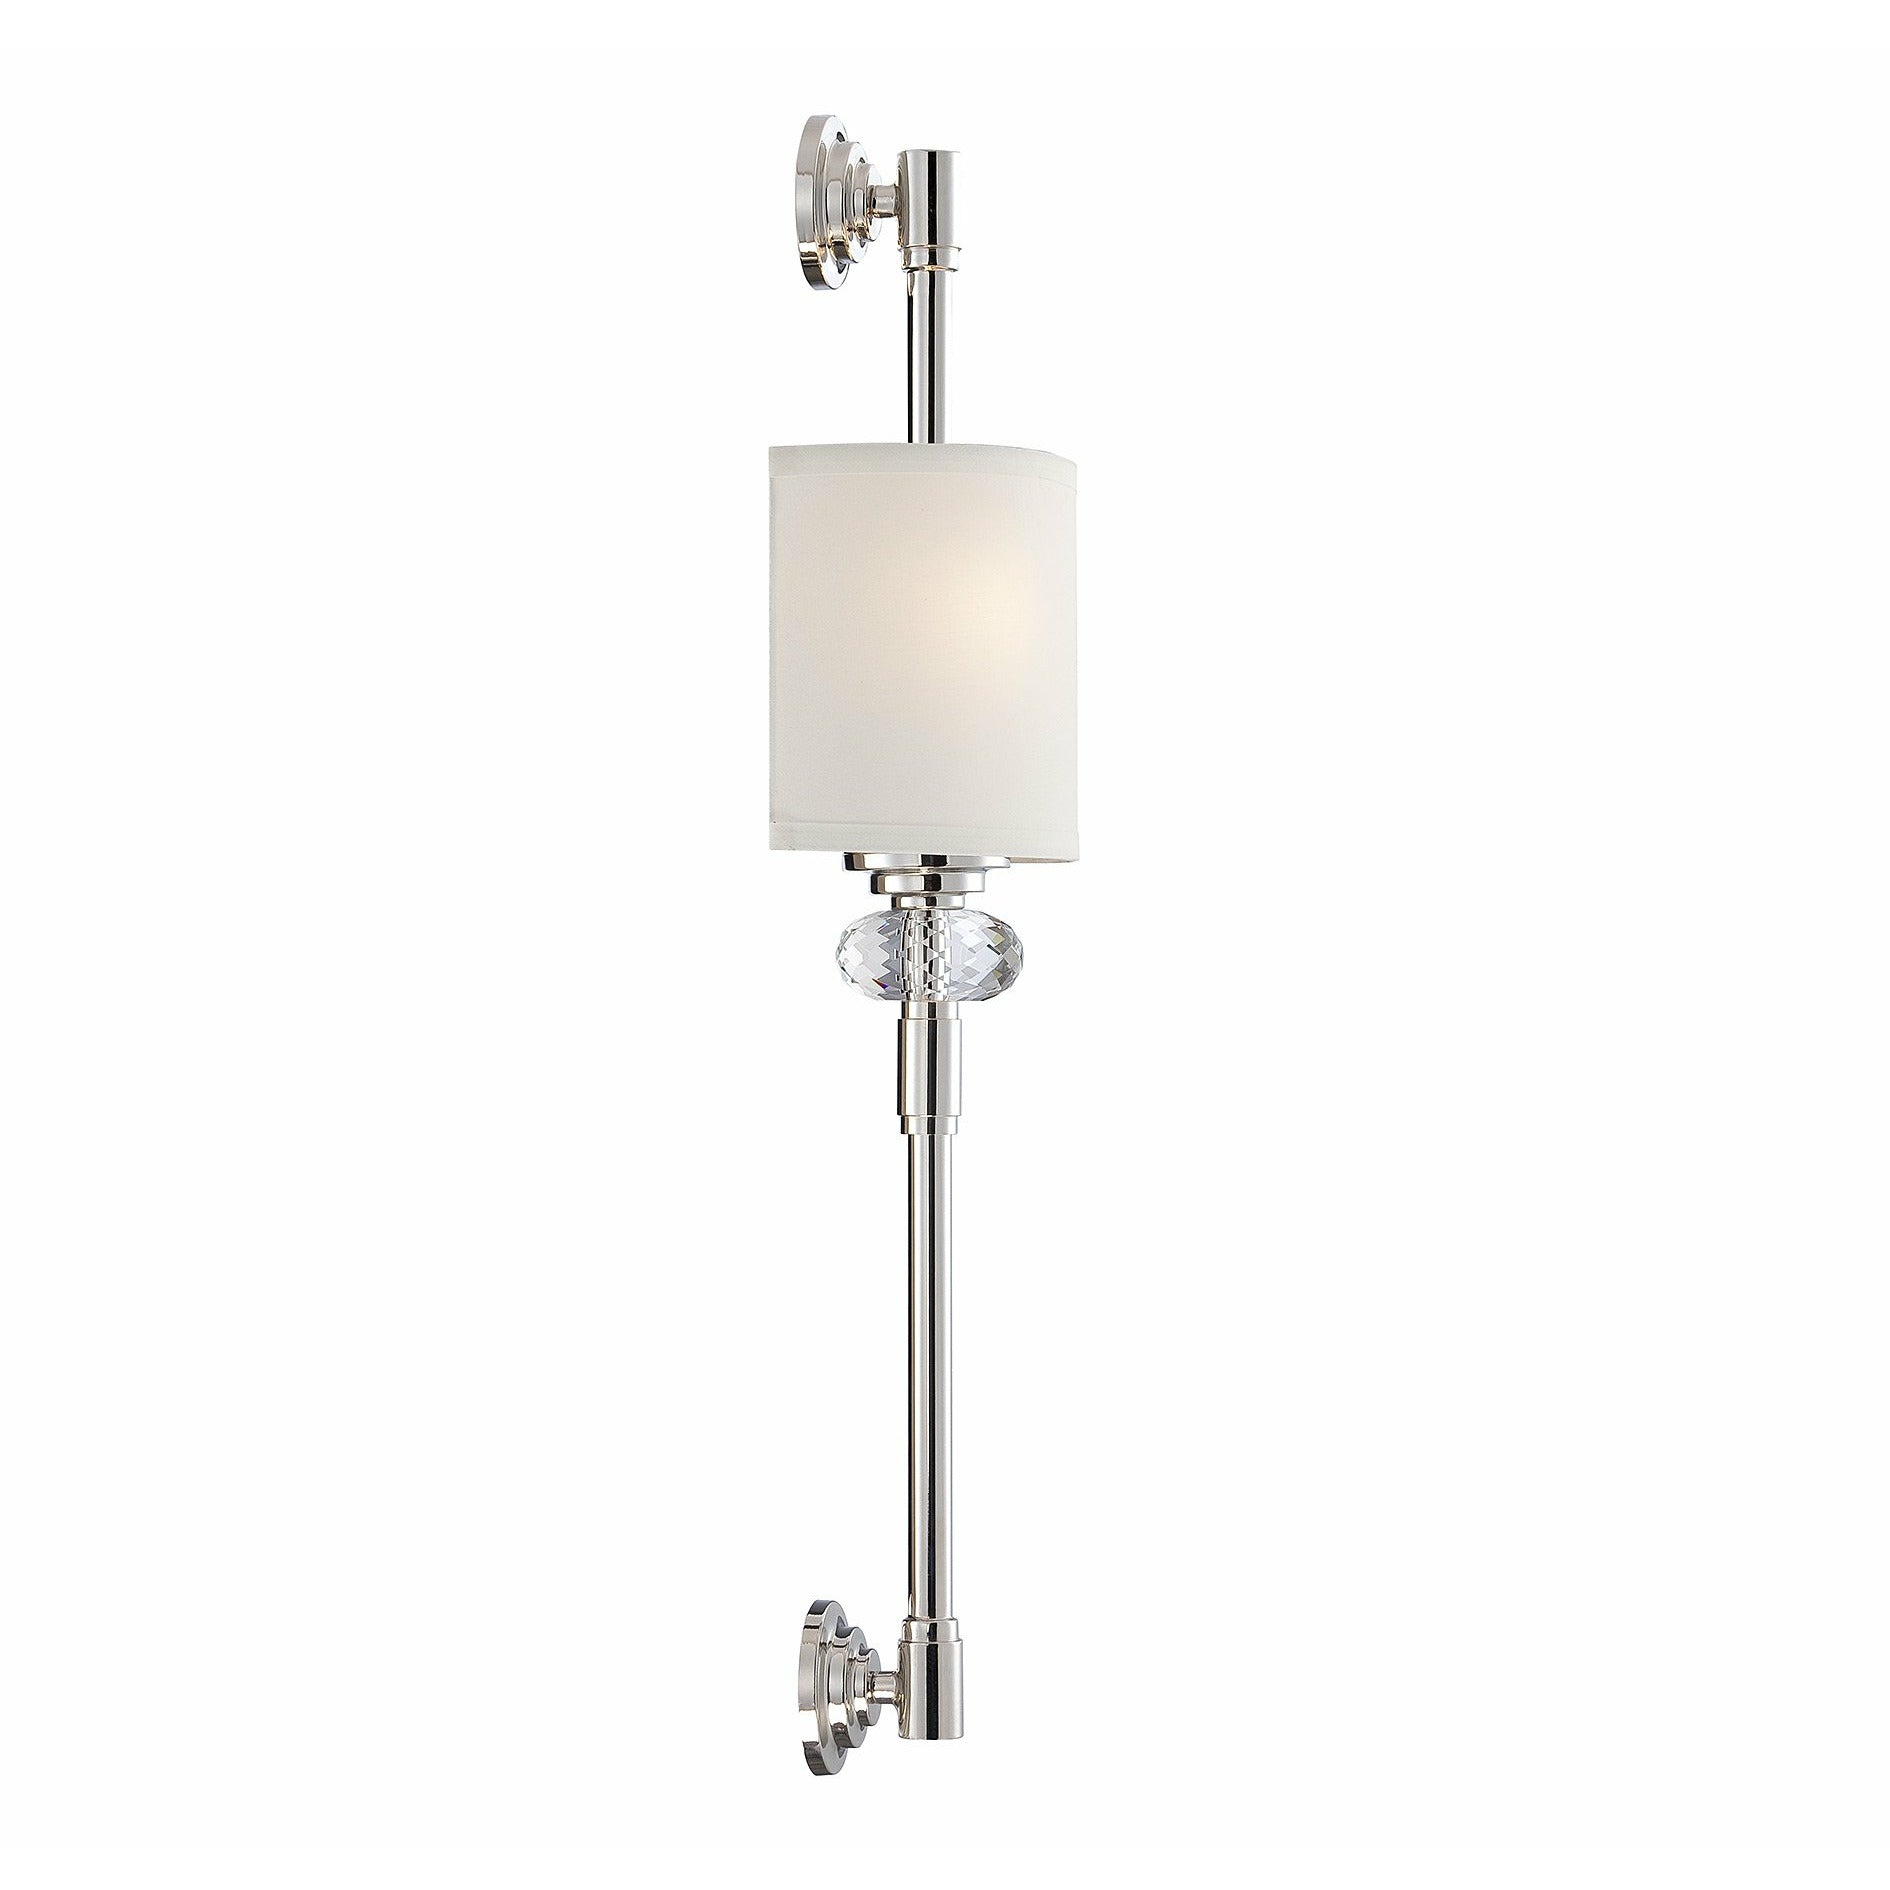 Marlow Sconce Polished Nickel